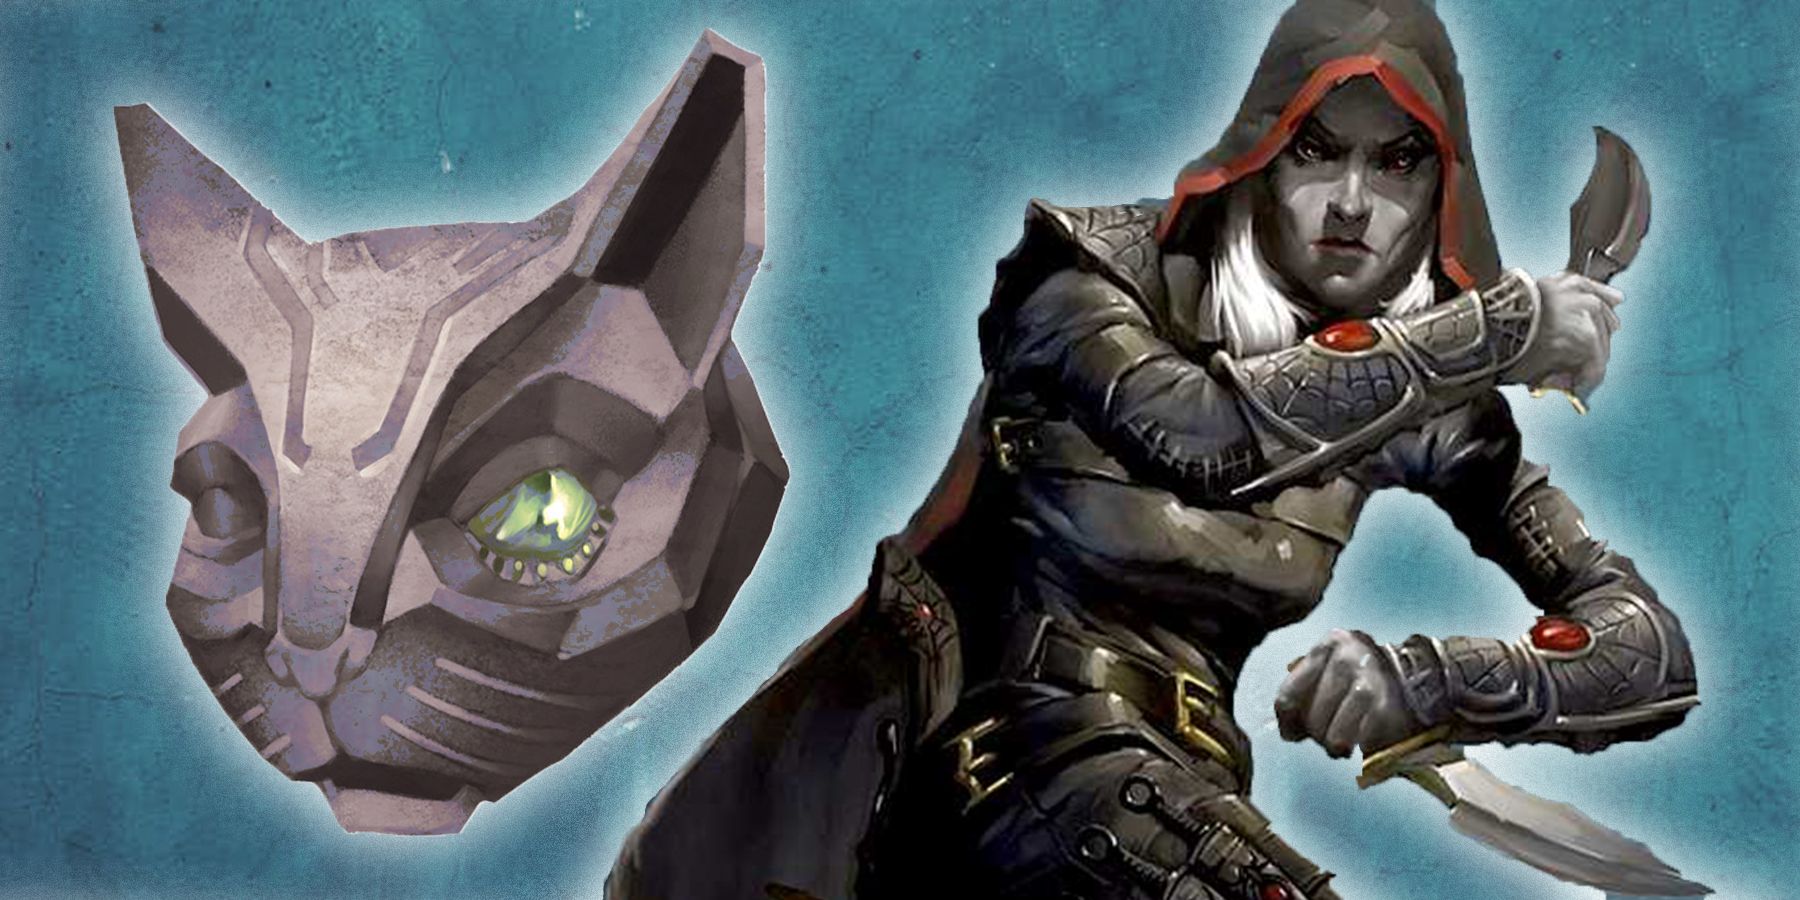 Rogue 201: The Best Magic Items for Rogues - Posts - D&D Beyond